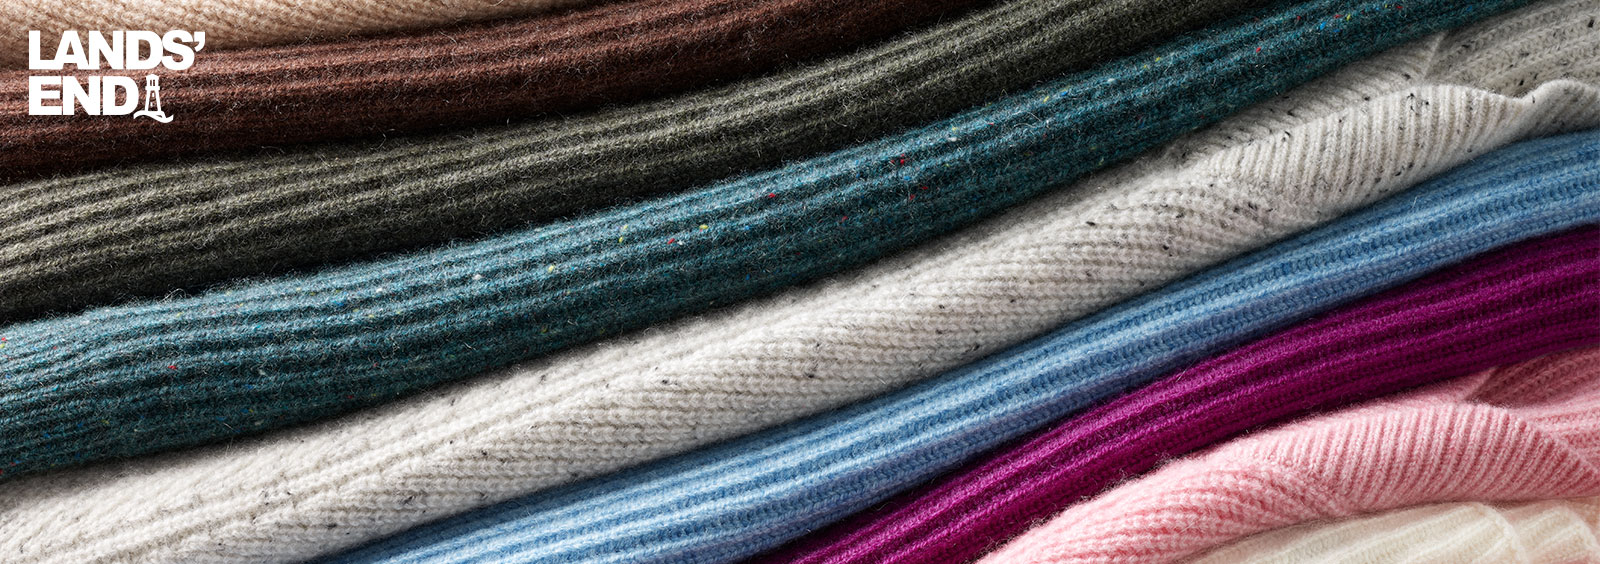 The Complete Guide to Shopping for and Owning Cashmere